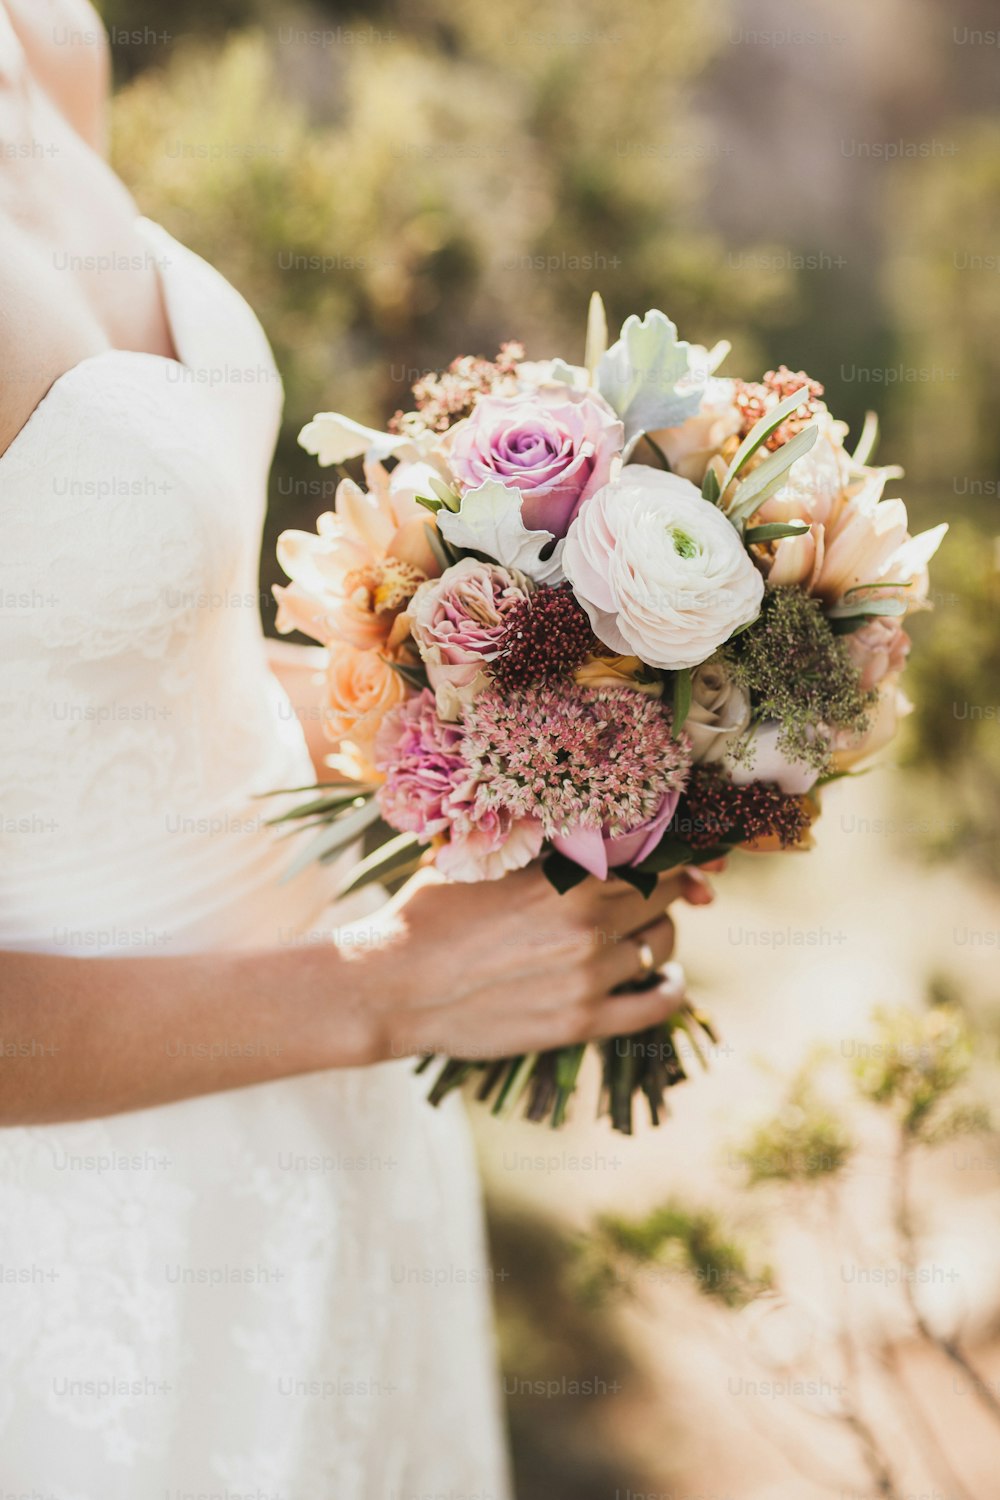 Bride holding in hands small wedding bouquet in orange autumn colors. Pink and orange roses, white peony, dried flowers and leaves.